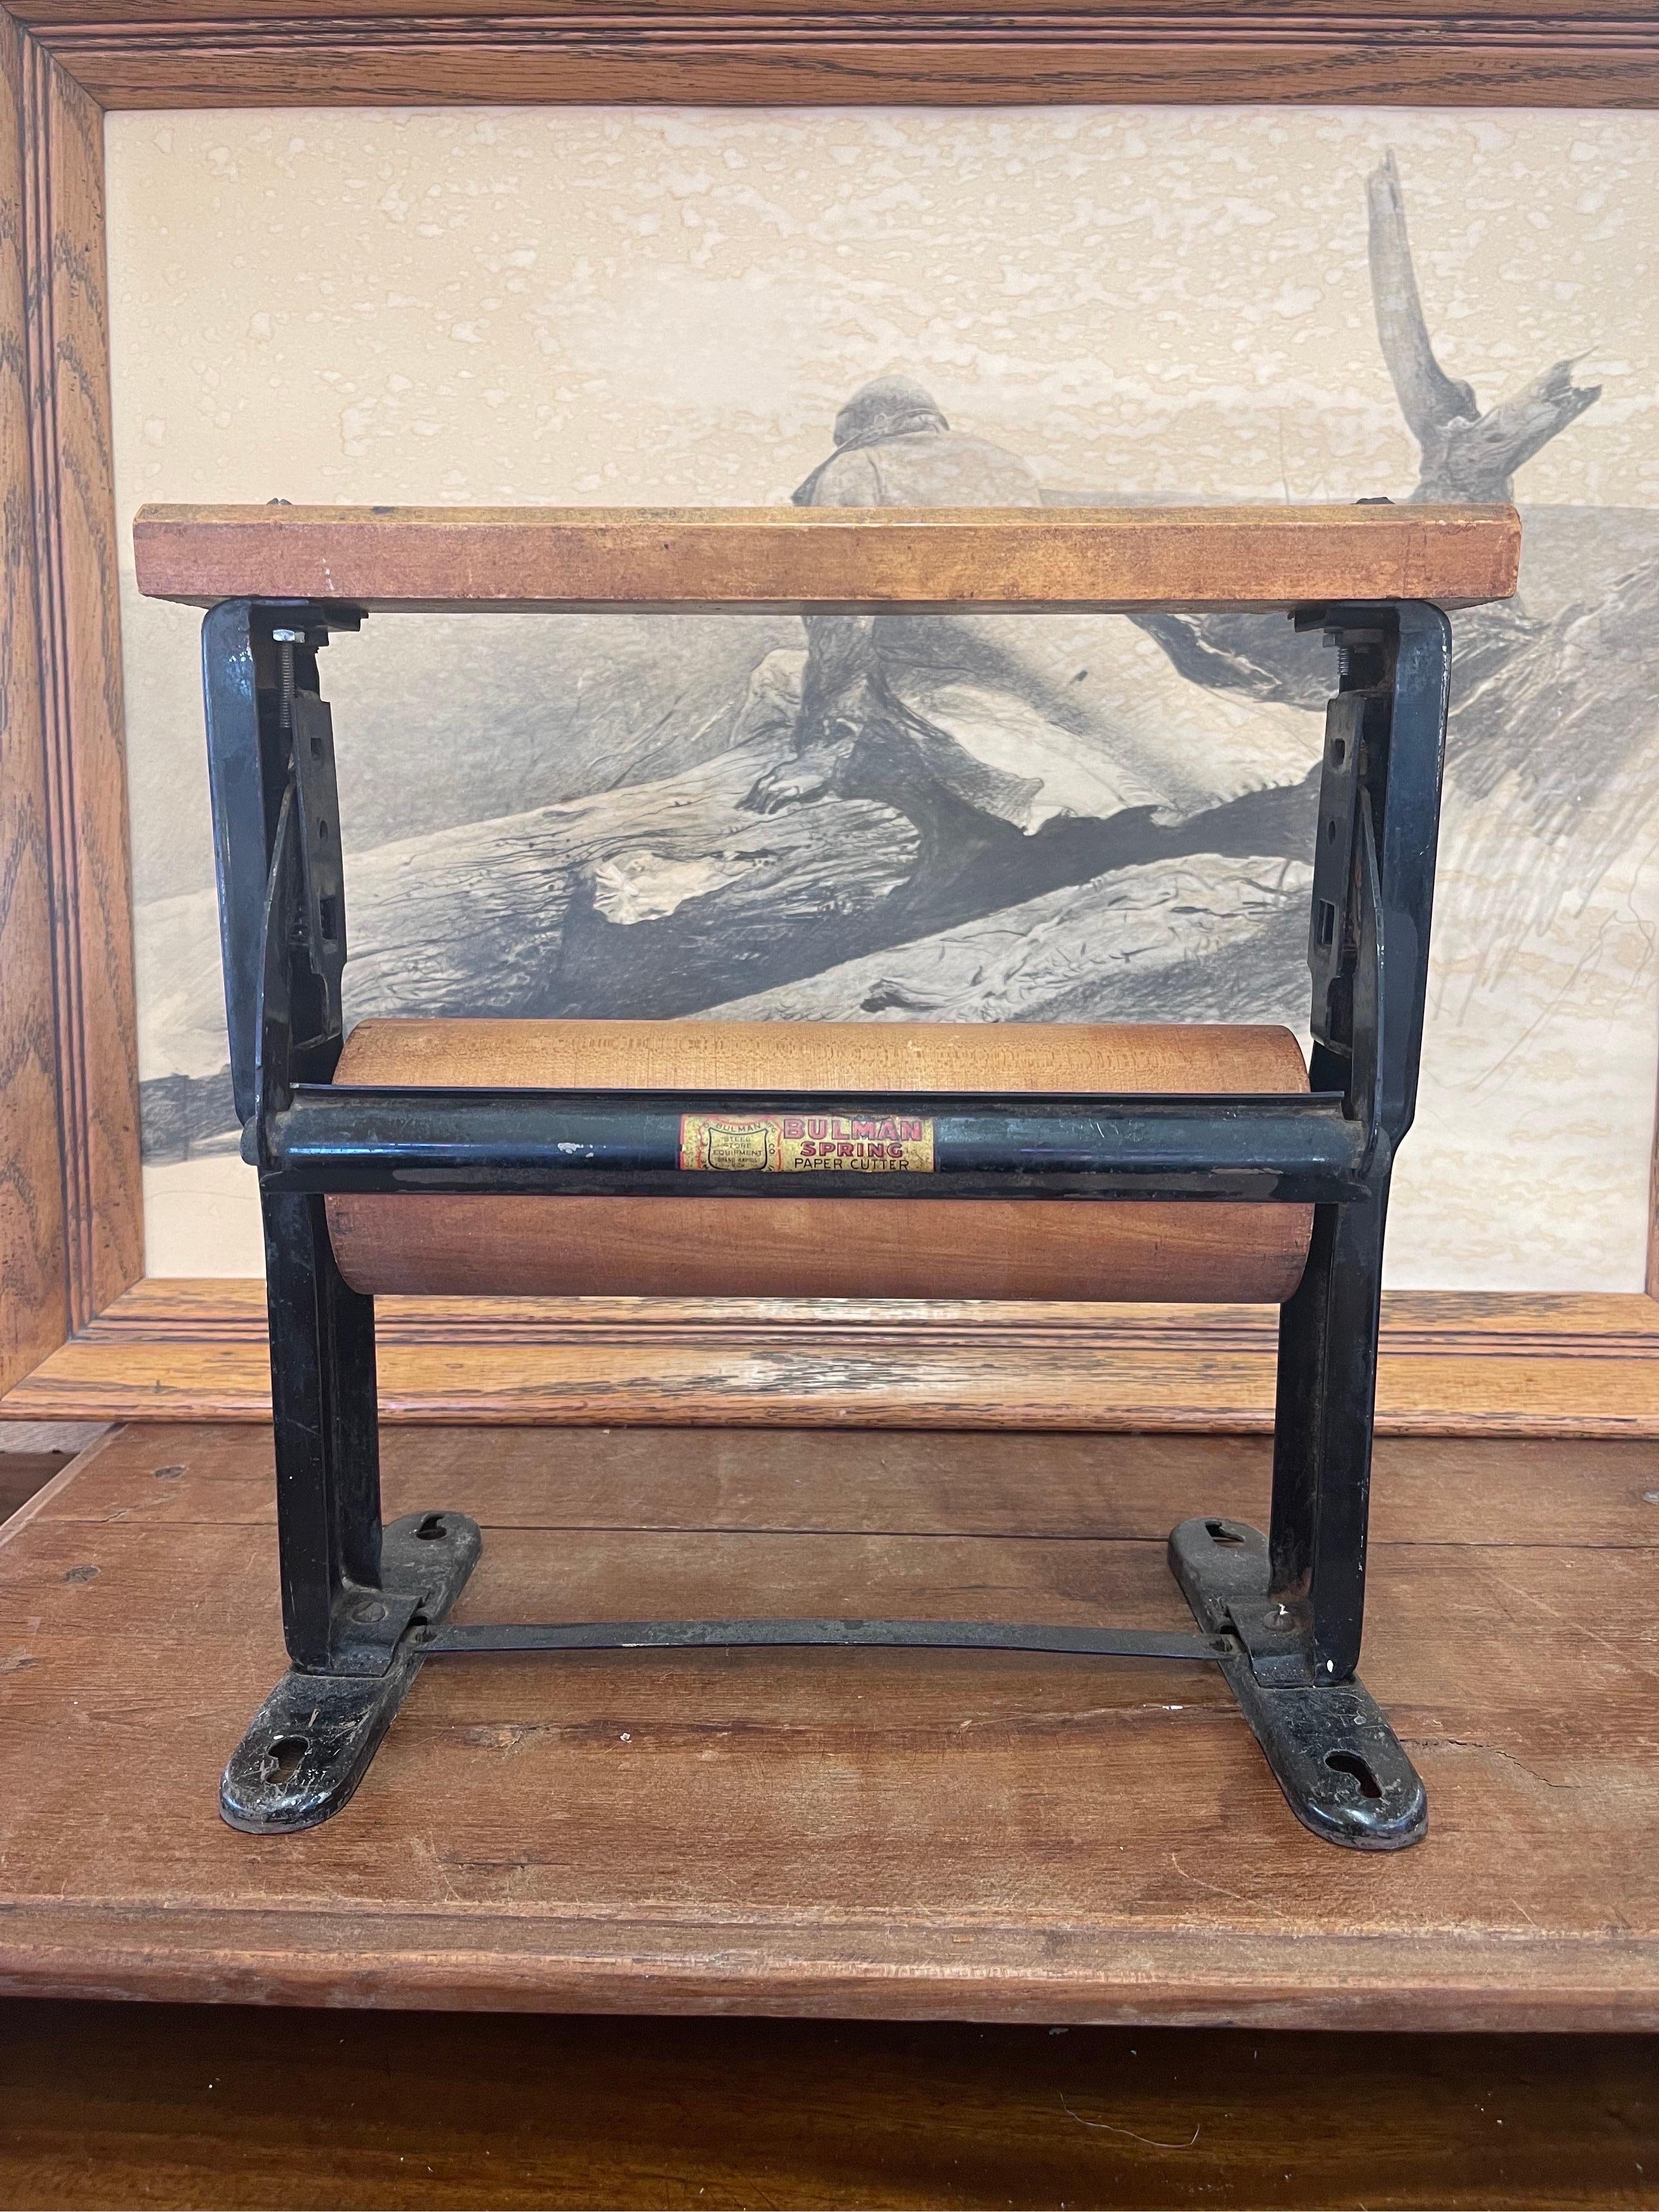 This item is Made with Wood and Cast Iron or Similar Material. All Movable Parts are in Good Condition. Vintage Condition Consistent with Age as Pictured.

Dimensions. 12 1/2 W ; 6 D ; 12 H